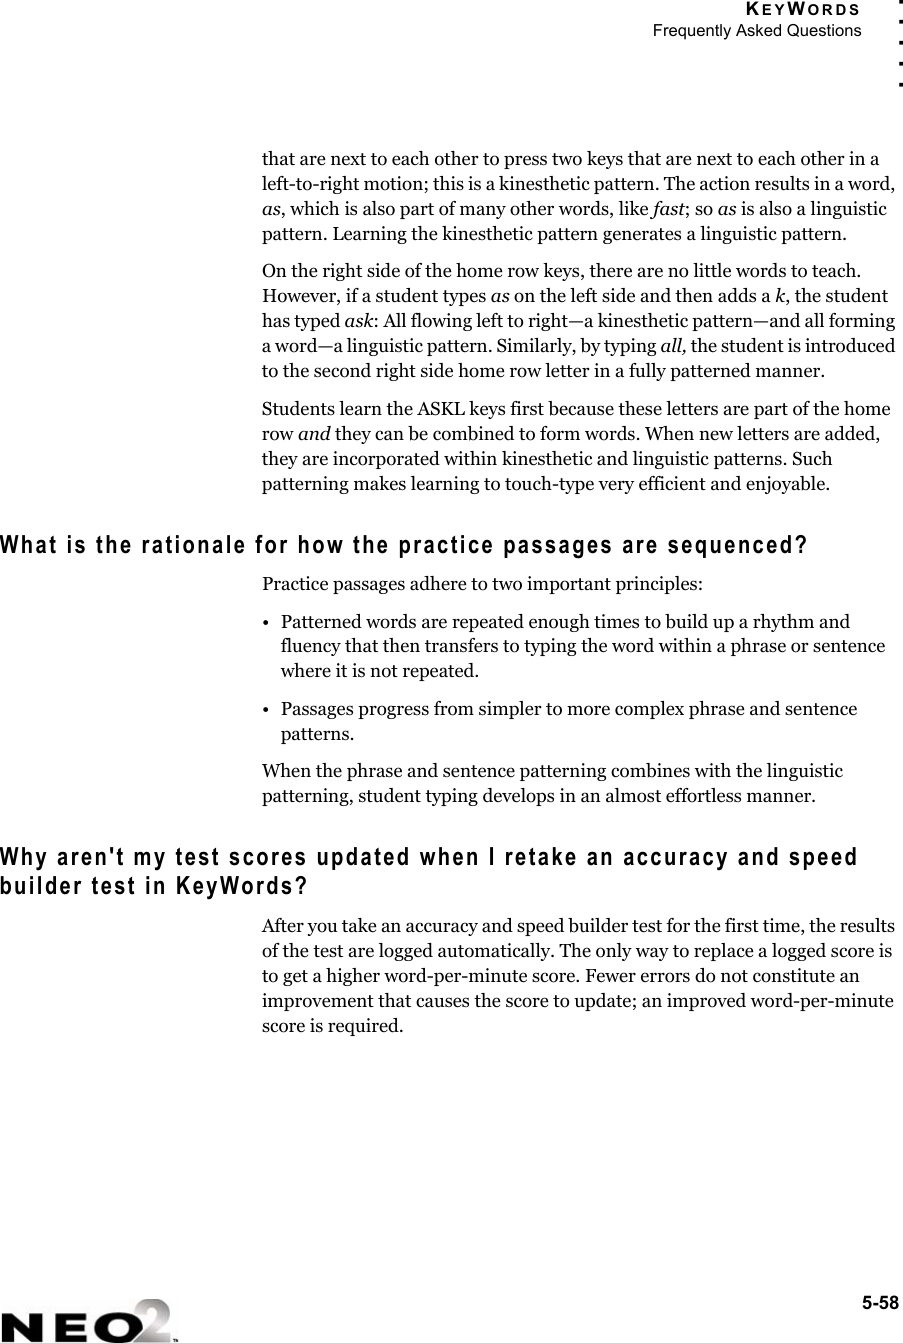 KEYWORDSFrequently Asked Questions5-58. . . . .that are next to each other to press two keys that are next to each other in a left-to-right motion; this is a kinesthetic pattern. The action results in a word, as, which is also part of many other words, like fast; so as is also a linguistic pattern. Learning the kinesthetic pattern generates a linguistic pattern. On the right side of the home row keys, there are no little words to teach. However, if a student types as on the left side and then adds a k, the student has typed ask: All flowing left to right—a kinesthetic pattern—and all forming a word—a linguistic pattern. Similarly, by typing all, the student is introduced to the second right side home row letter in a fully patterned manner. Students learn the ASKL keys first because these letters are part of the home row and they can be combined to form words. When new letters are added, they are incorporated within kinesthetic and linguistic patterns. Such patterning makes learning to touch-type very efficient and enjoyable.What is the rationale for how the practice passages are sequenced?Practice passages adhere to two important principles: • Patterned words are repeated enough times to build up a rhythm and fluency that then transfers to typing the word within a phrase or sentence where it is not repeated.• Passages progress from simpler to more complex phrase and sentence patterns. When the phrase and sentence patterning combines with the linguistic patterning, student typing develops in an almost effortless manner. Why aren&apos;t my test scores updated when I retake an accuracy and speed builder test in KeyWords? After you take an accuracy and speed builder test for the first time, the results of the test are logged automatically. The only way to replace a logged score is to get a higher word-per-minute score. Fewer errors do not constitute an improvement that causes the score to update; an improved word-per-minute score is required. 